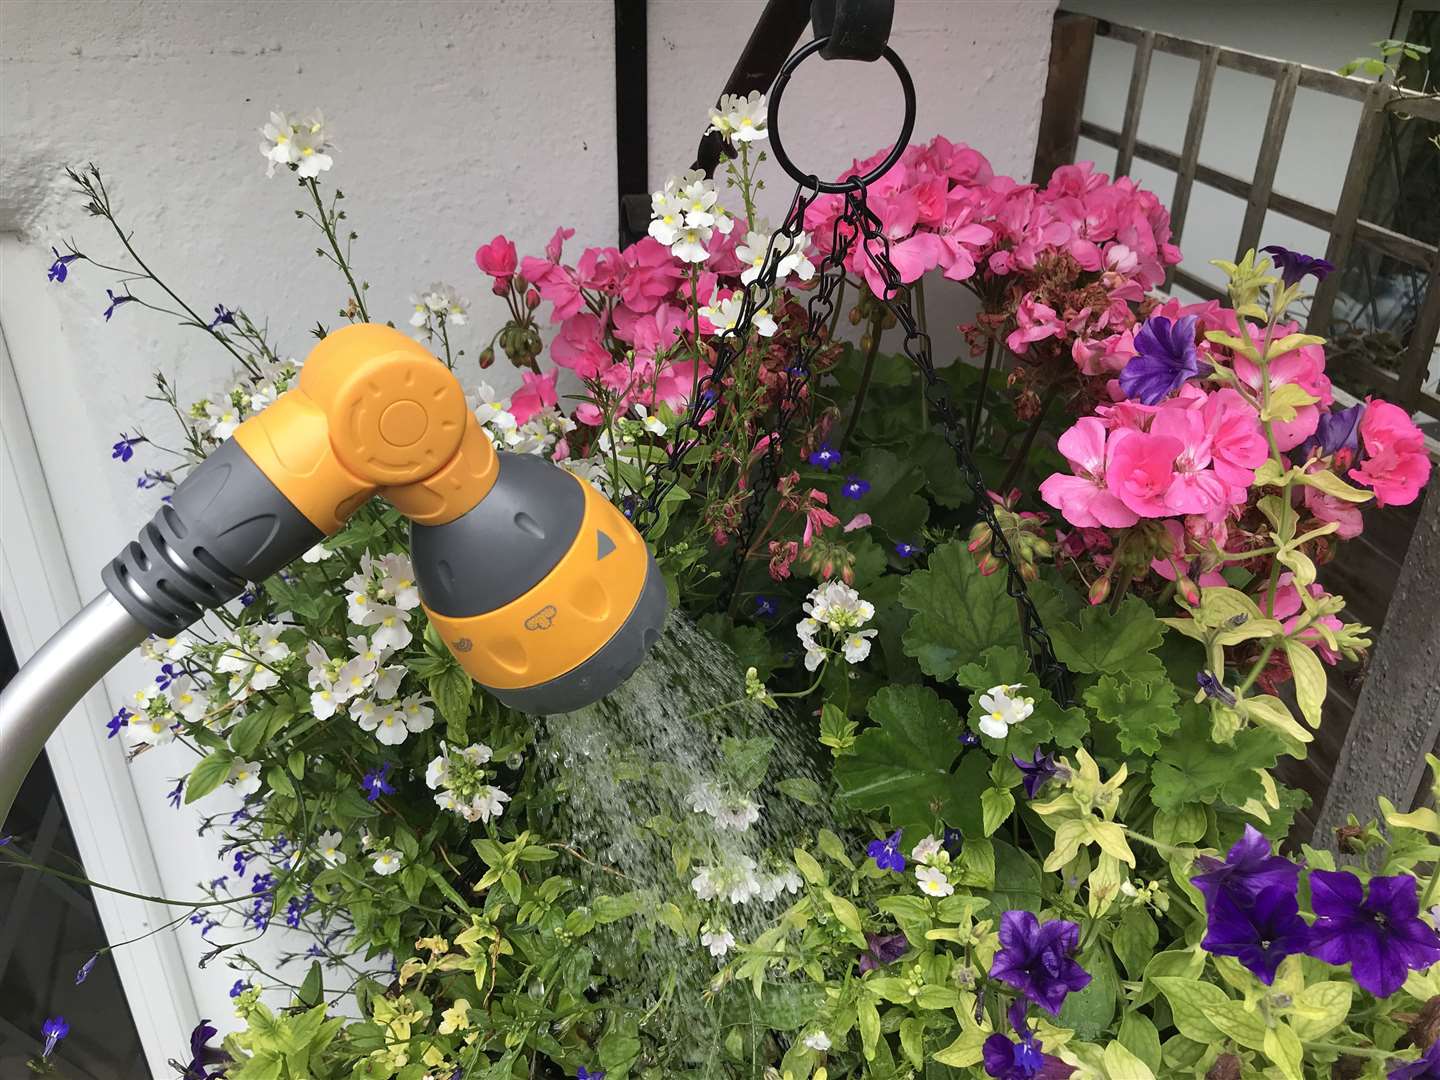 A hose spray being used to water a hanging basket. Picture: Hannah Stephenson/PA